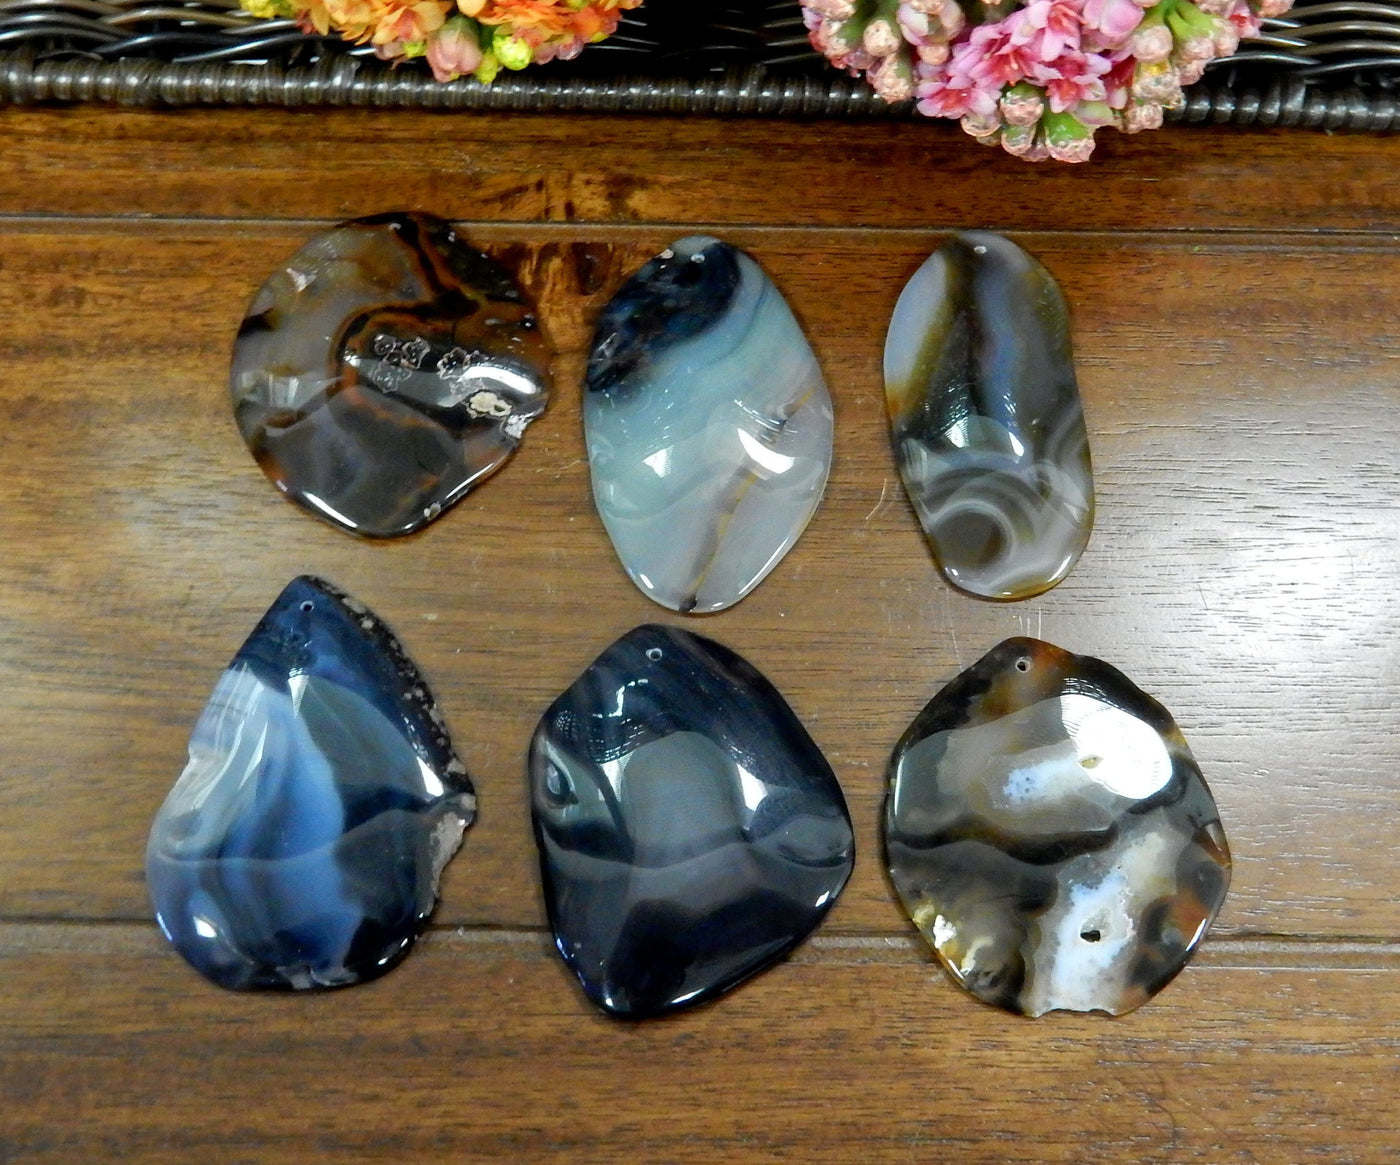 6 Black FreeForm Agate Slices with Polished Edge on Wooden Background.